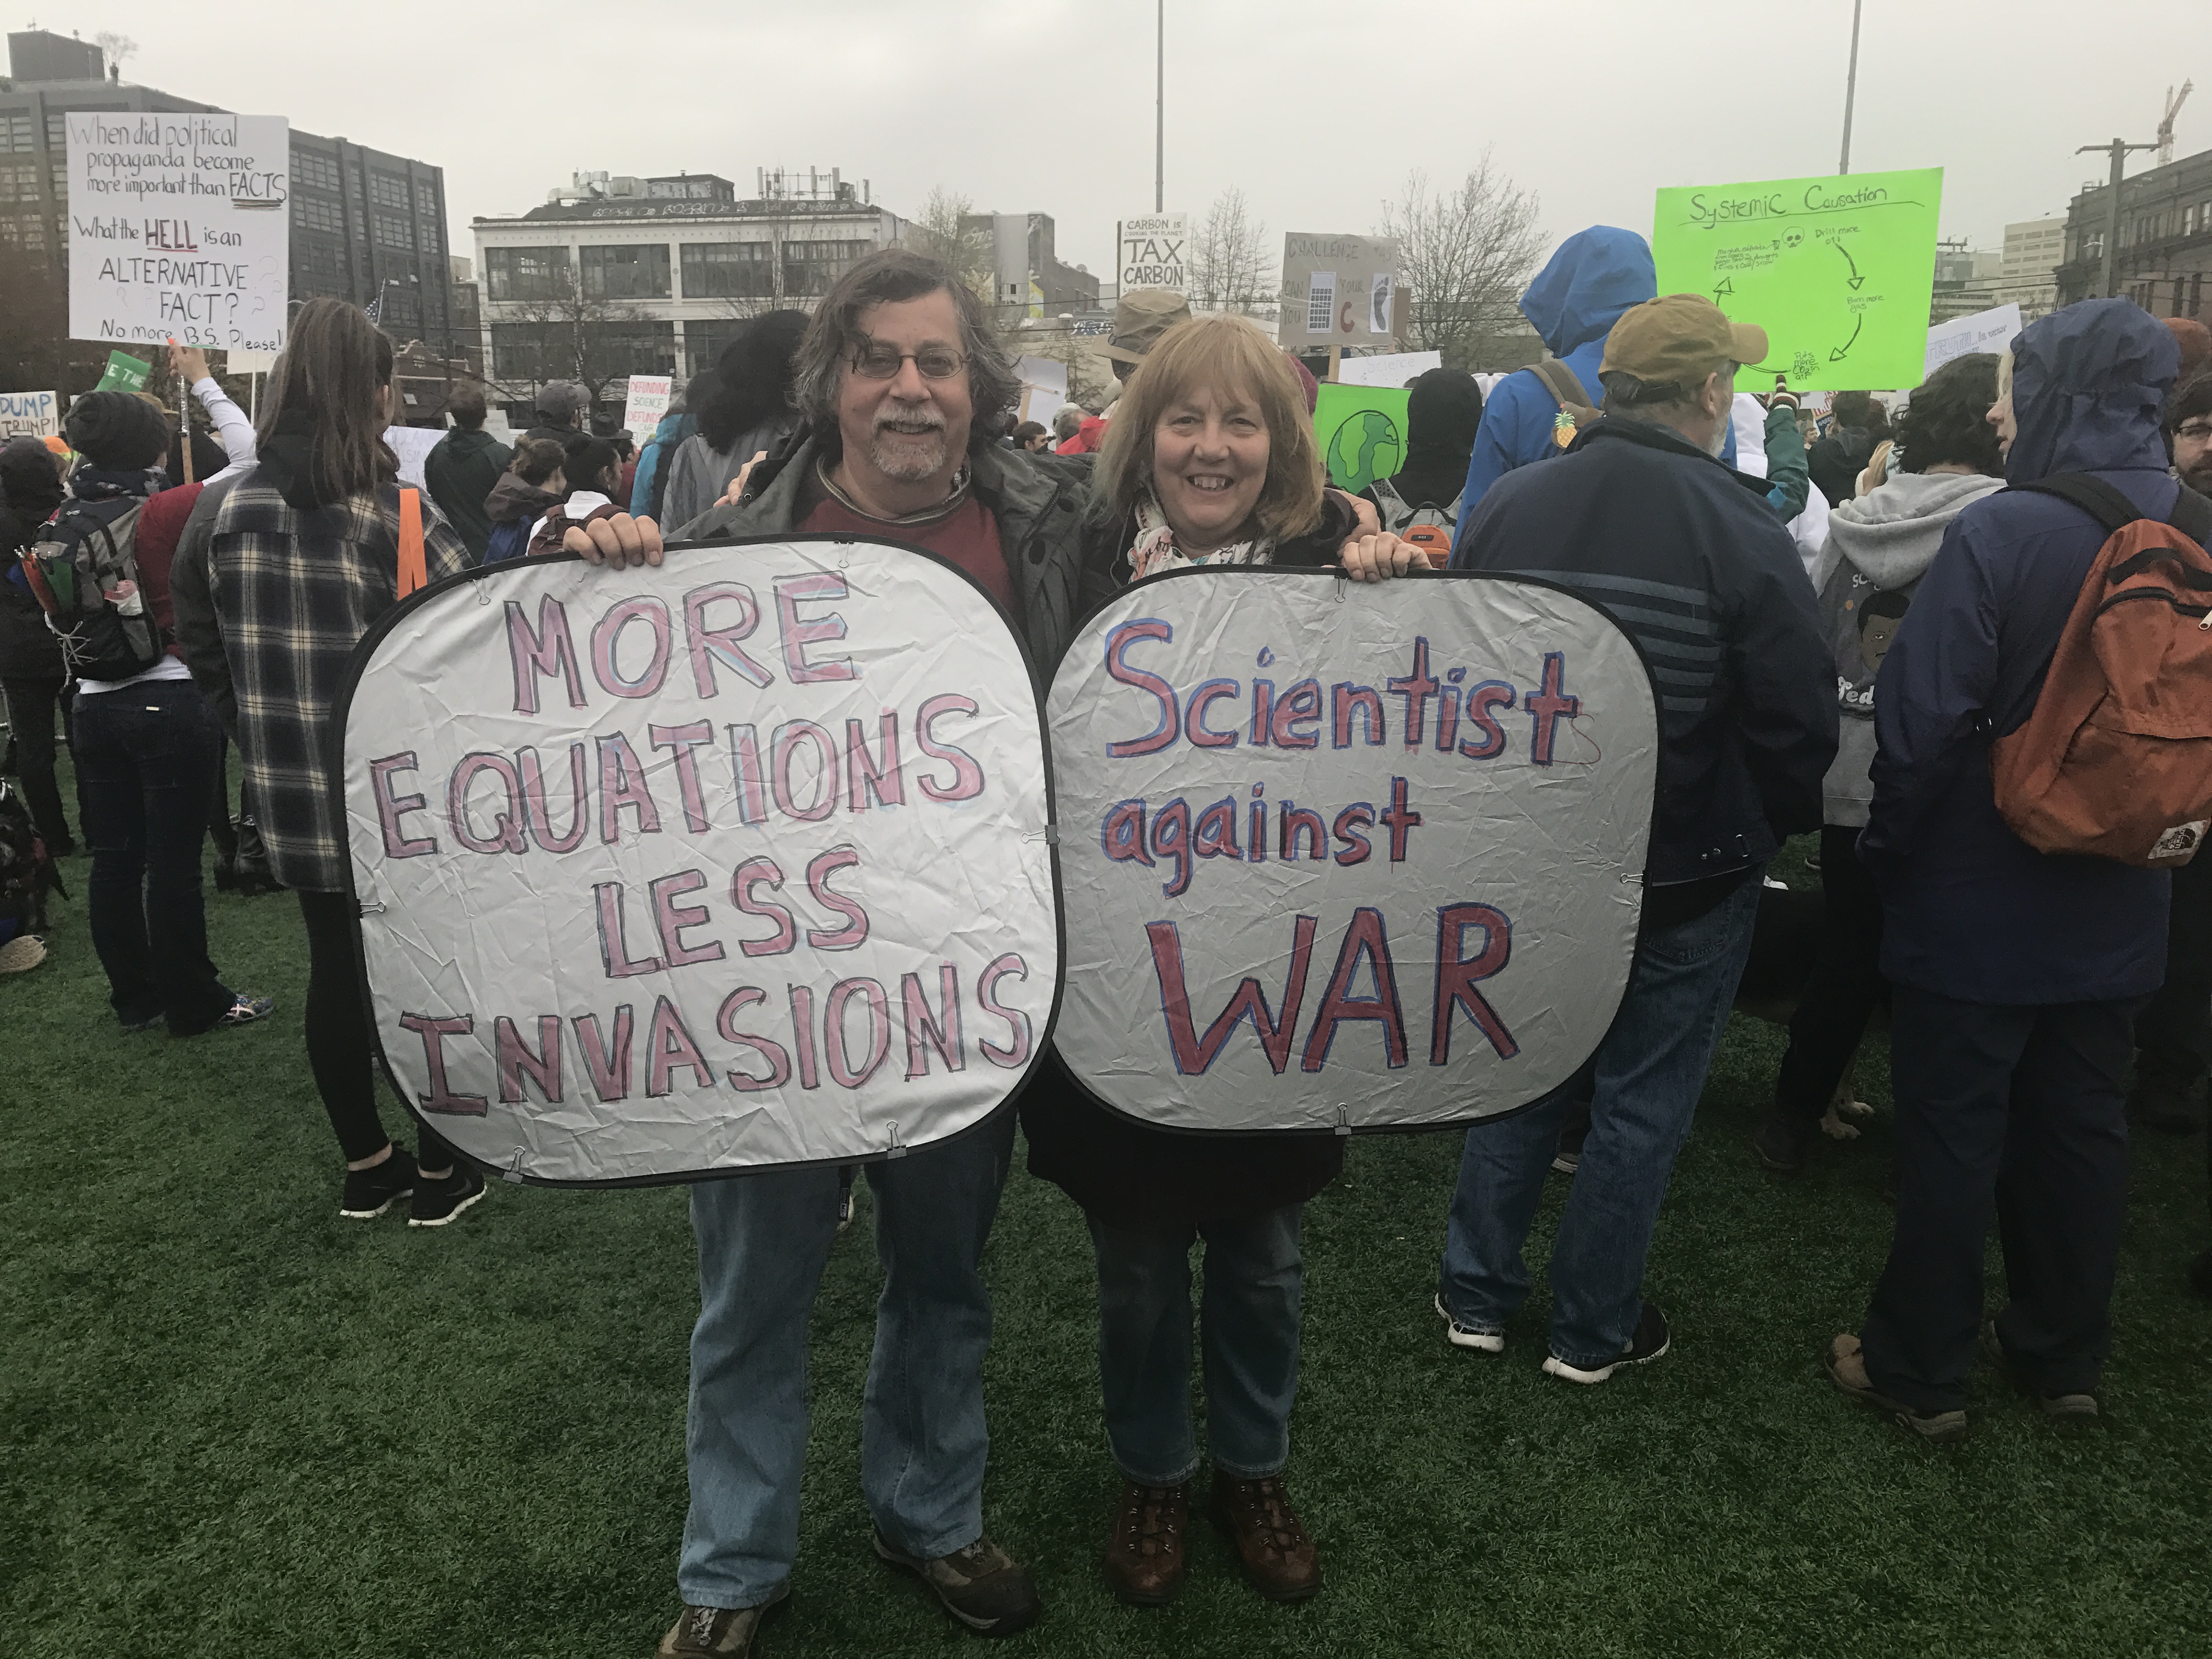 Scientists Kathy Barker and Alan Aderem attended with thousands of others in Seattle, Washington state. "Science without intentional thought and morality can do great harm," they said. 
